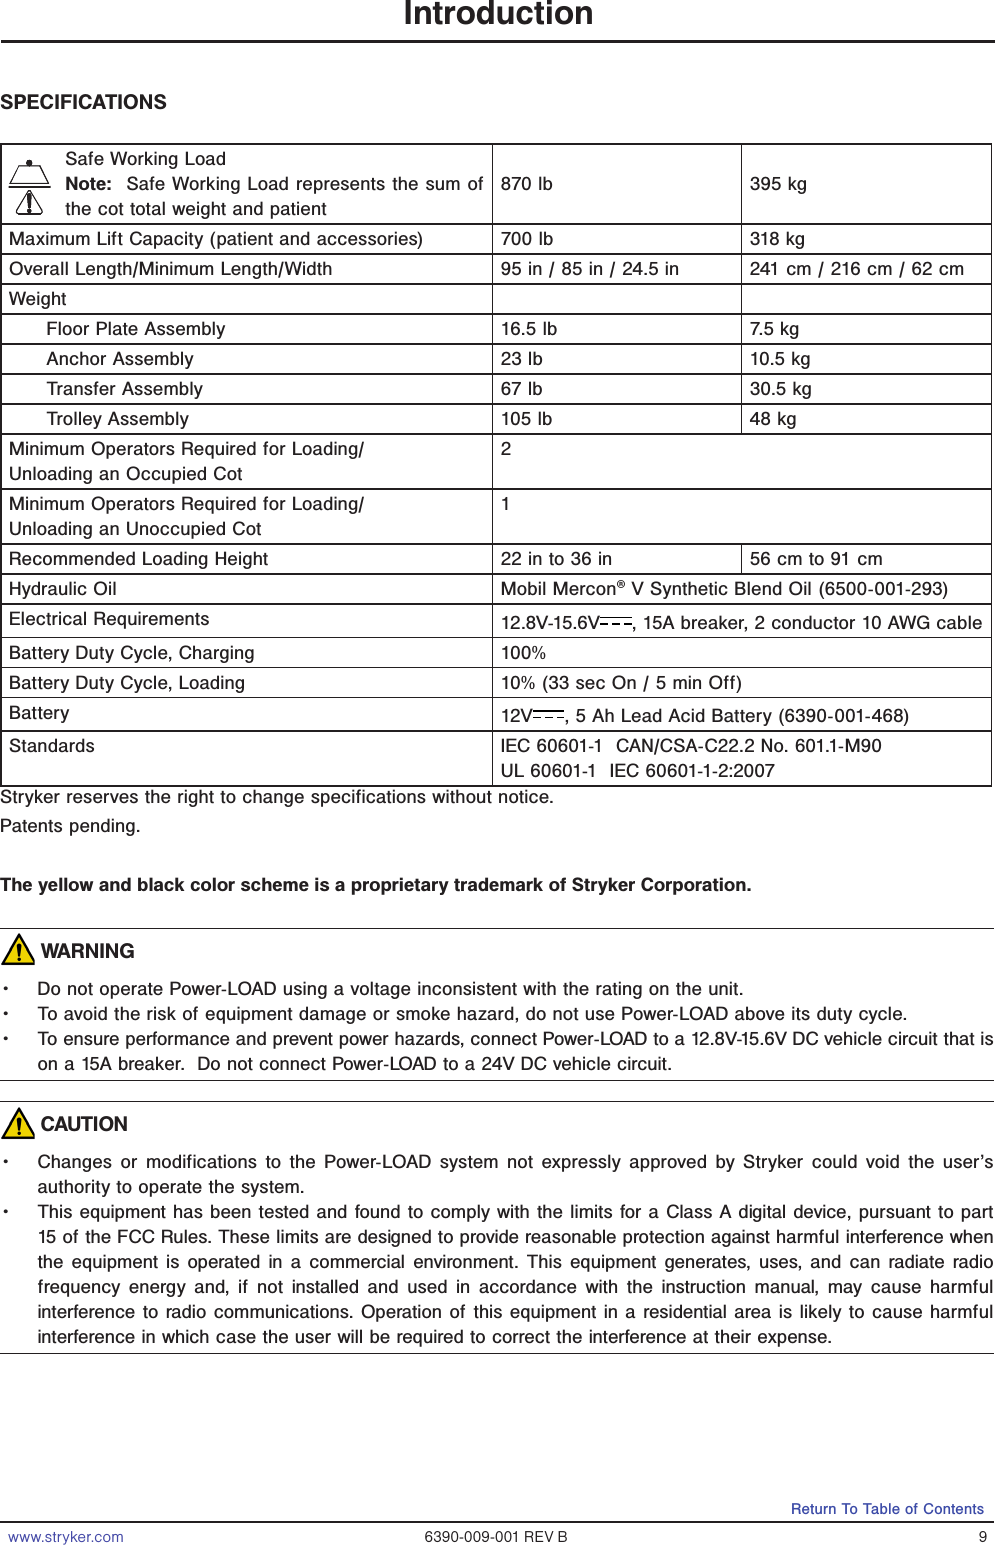 www.stryker.com 6390-009-001 REV B 9Return To Table of ContentsIntroductionSPECIFICATIONSSafe Working LoadNote:  Safe Working Load represents the sum of the cot total weight and patient870 lb 395 kgMaximum Lift Capacity (patient and accessories) 700 lb 318 kgOverall Length/Minimum Length/Width 95 in / 85 in / 24.5 in 241 cm / 216 cm / 62 cmWeightFloor Plate Assembly 16.5 lb 7.5 kgAnchor Assembly 23 lb 10.5 kgTransfer Assembly 67 lb 30.5 kgTrolley Assembly 105 lb 48 kgMinimum Operators Required for Loading/Unloading an Occupied Cot2Minimum Operators Required for Loading/Unloading an Unoccupied Cot1Recommended Loading Height 22 in to 36 in 56 cm to 91 cmHydraulic Oil Mobil Mercon® V Synthetic Blend Oil (6500-001-293)Electrical Requirements 12.8V-15.6V , 15A breaker, 2 conductor 10 AWG cableBattery Duty Cycle, Charging 100%Battery Duty Cycle, Loading  10% (33 sec On / 5 min Off)Battery  12V , 5 Ah Lead Acid Battery (6390-001-468)Standards IEC 60601-1  CAN/CSA-C22.2 No. 601.1-M90UL 60601-1  IEC 60601-1-2:2007Stryker reserves the right to change specifications without notice.Patents pending.The yellow and black color scheme is a proprietary trademark of Stryker Corporation. WARNING• Do not operate Power-LOAD using a voltage inconsistent with the rating on the unit.• To avoid the risk of equipment damage or smoke hazard, do not use Power-LOAD above its duty cycle.• To ensure performance and prevent power hazards, connect Power-LOAD to a 12.8V-15.6V DC vehicle circuit that is on a 15A breaker.  Do not connect Power-LOAD to a 24V DC vehicle circuit. CAUTION• Changes or modifications to the Power-LOAD system not expressly approved by Stryker could void the user’s authority to operate the system.• This equipment has been tested and found to comply with the limits for a Class A digital device, pursuant to part 15 of the FCC Rules. These limits are designed to provide reasonable protection against harmful interference when the equipment is operated in a commercial environment. This equipment generates, uses, and can radiate radio frequency energy and, if not installed and used in accordance with the instruction manual, may cause harmful interference to radio communications. Operation of this equipment in a residential area is likely to cause harmful interference in which case the user will be required to correct the interference at their expense.